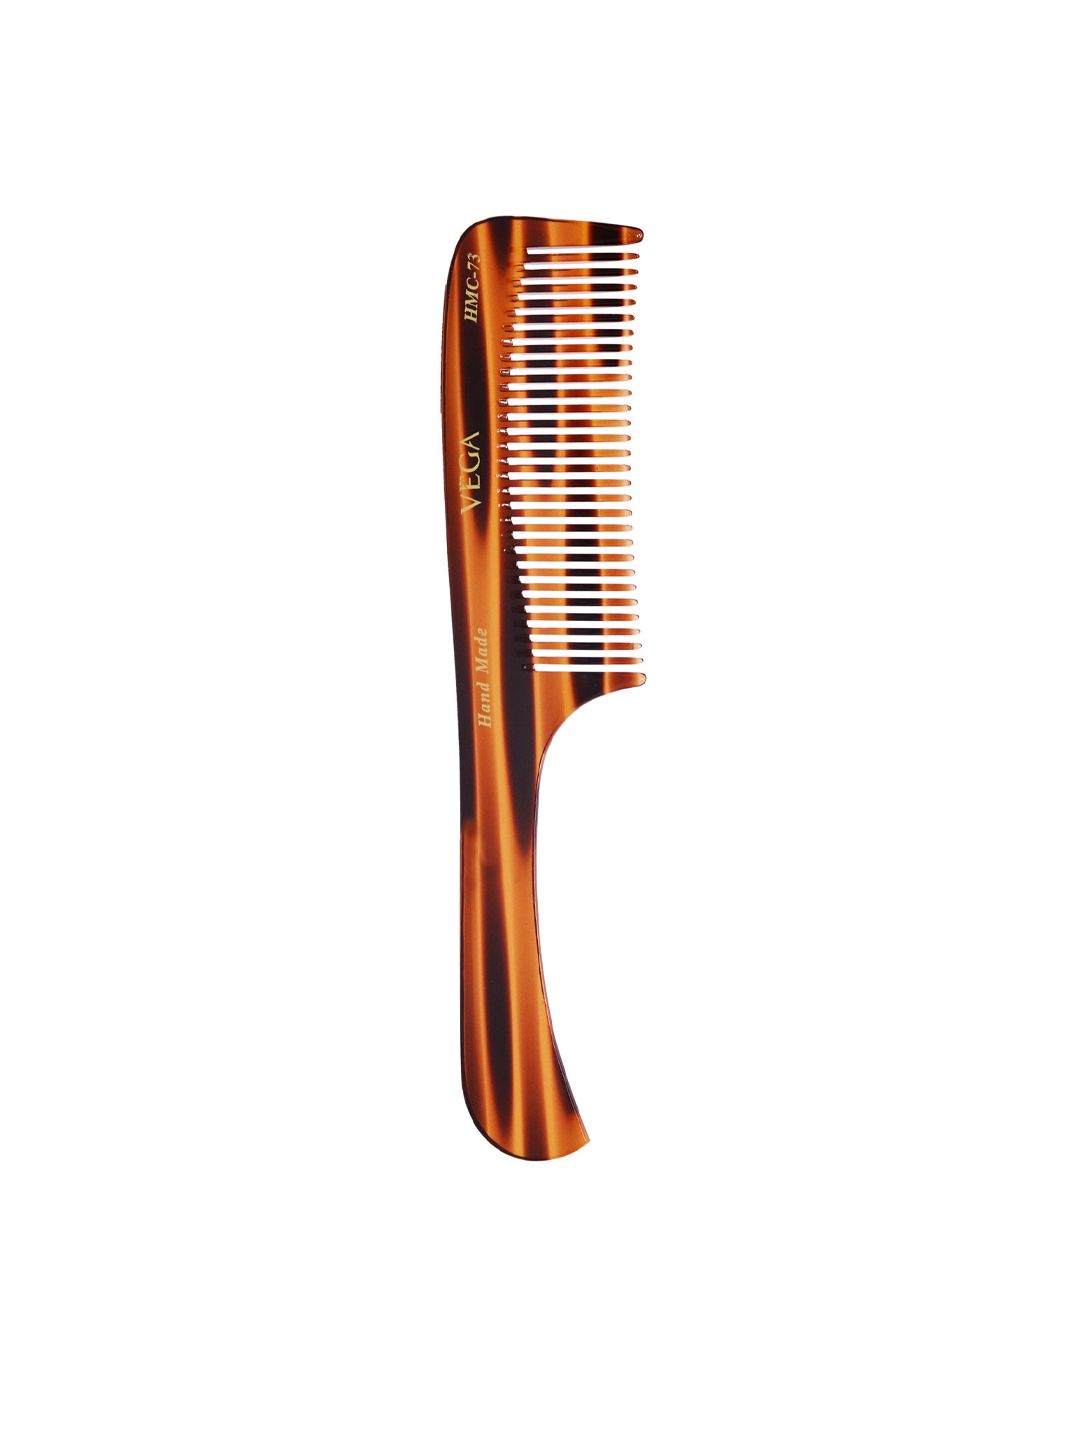 VEGA Brown Handcrafted Grooming Comb HMC-73 Price in India